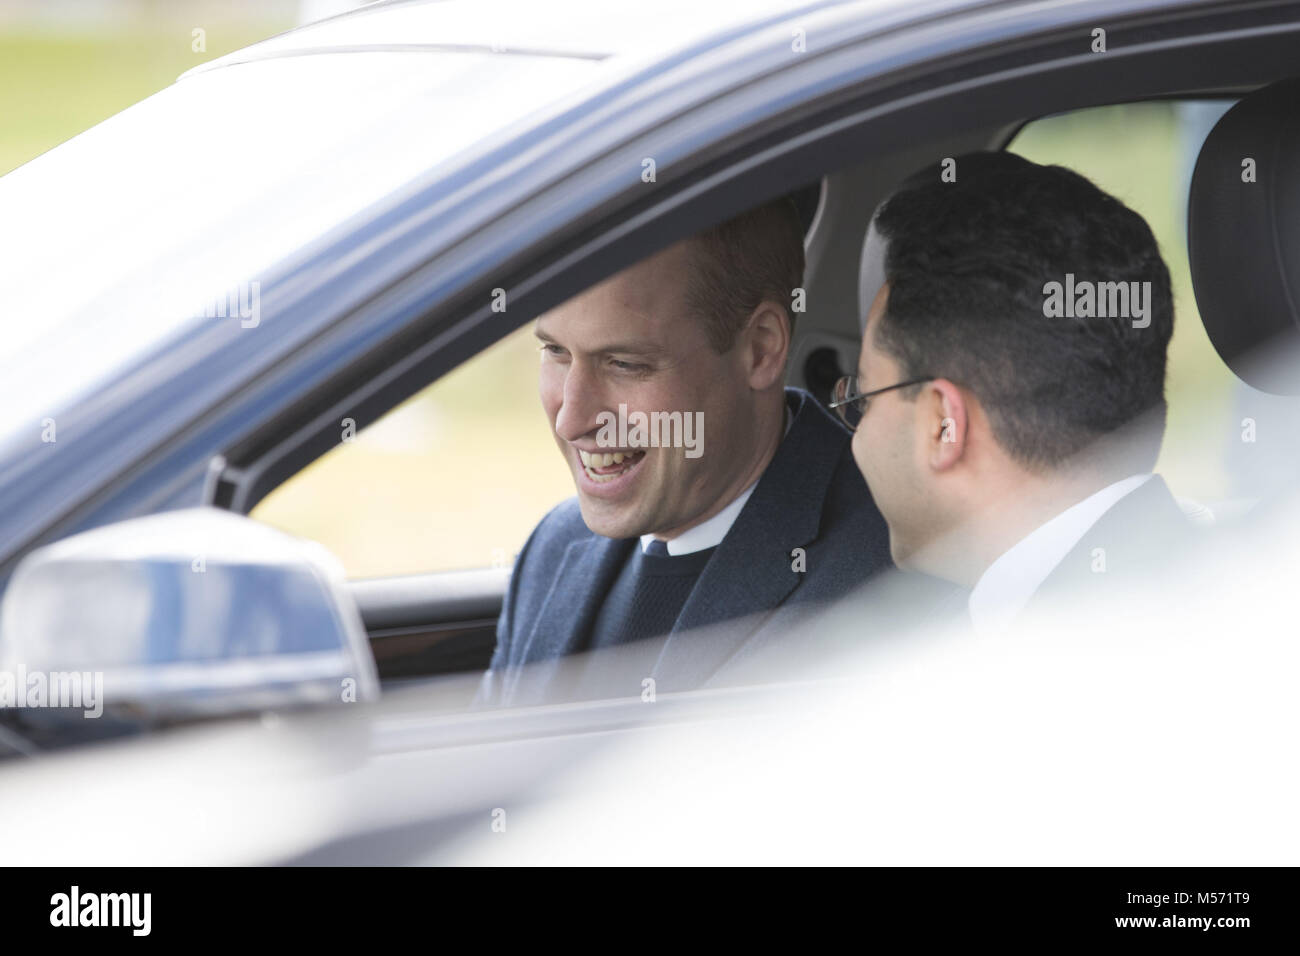 The Duke of Cambridge inside a ClearMotion BMW vehicle at the MIRA Technology Park in Nuneaton, Warwickshire, which supplies pioneering engineering, research and test services to the transport industry. MIRA was formerly known as the Motor Industry Research Association. Stock Photo